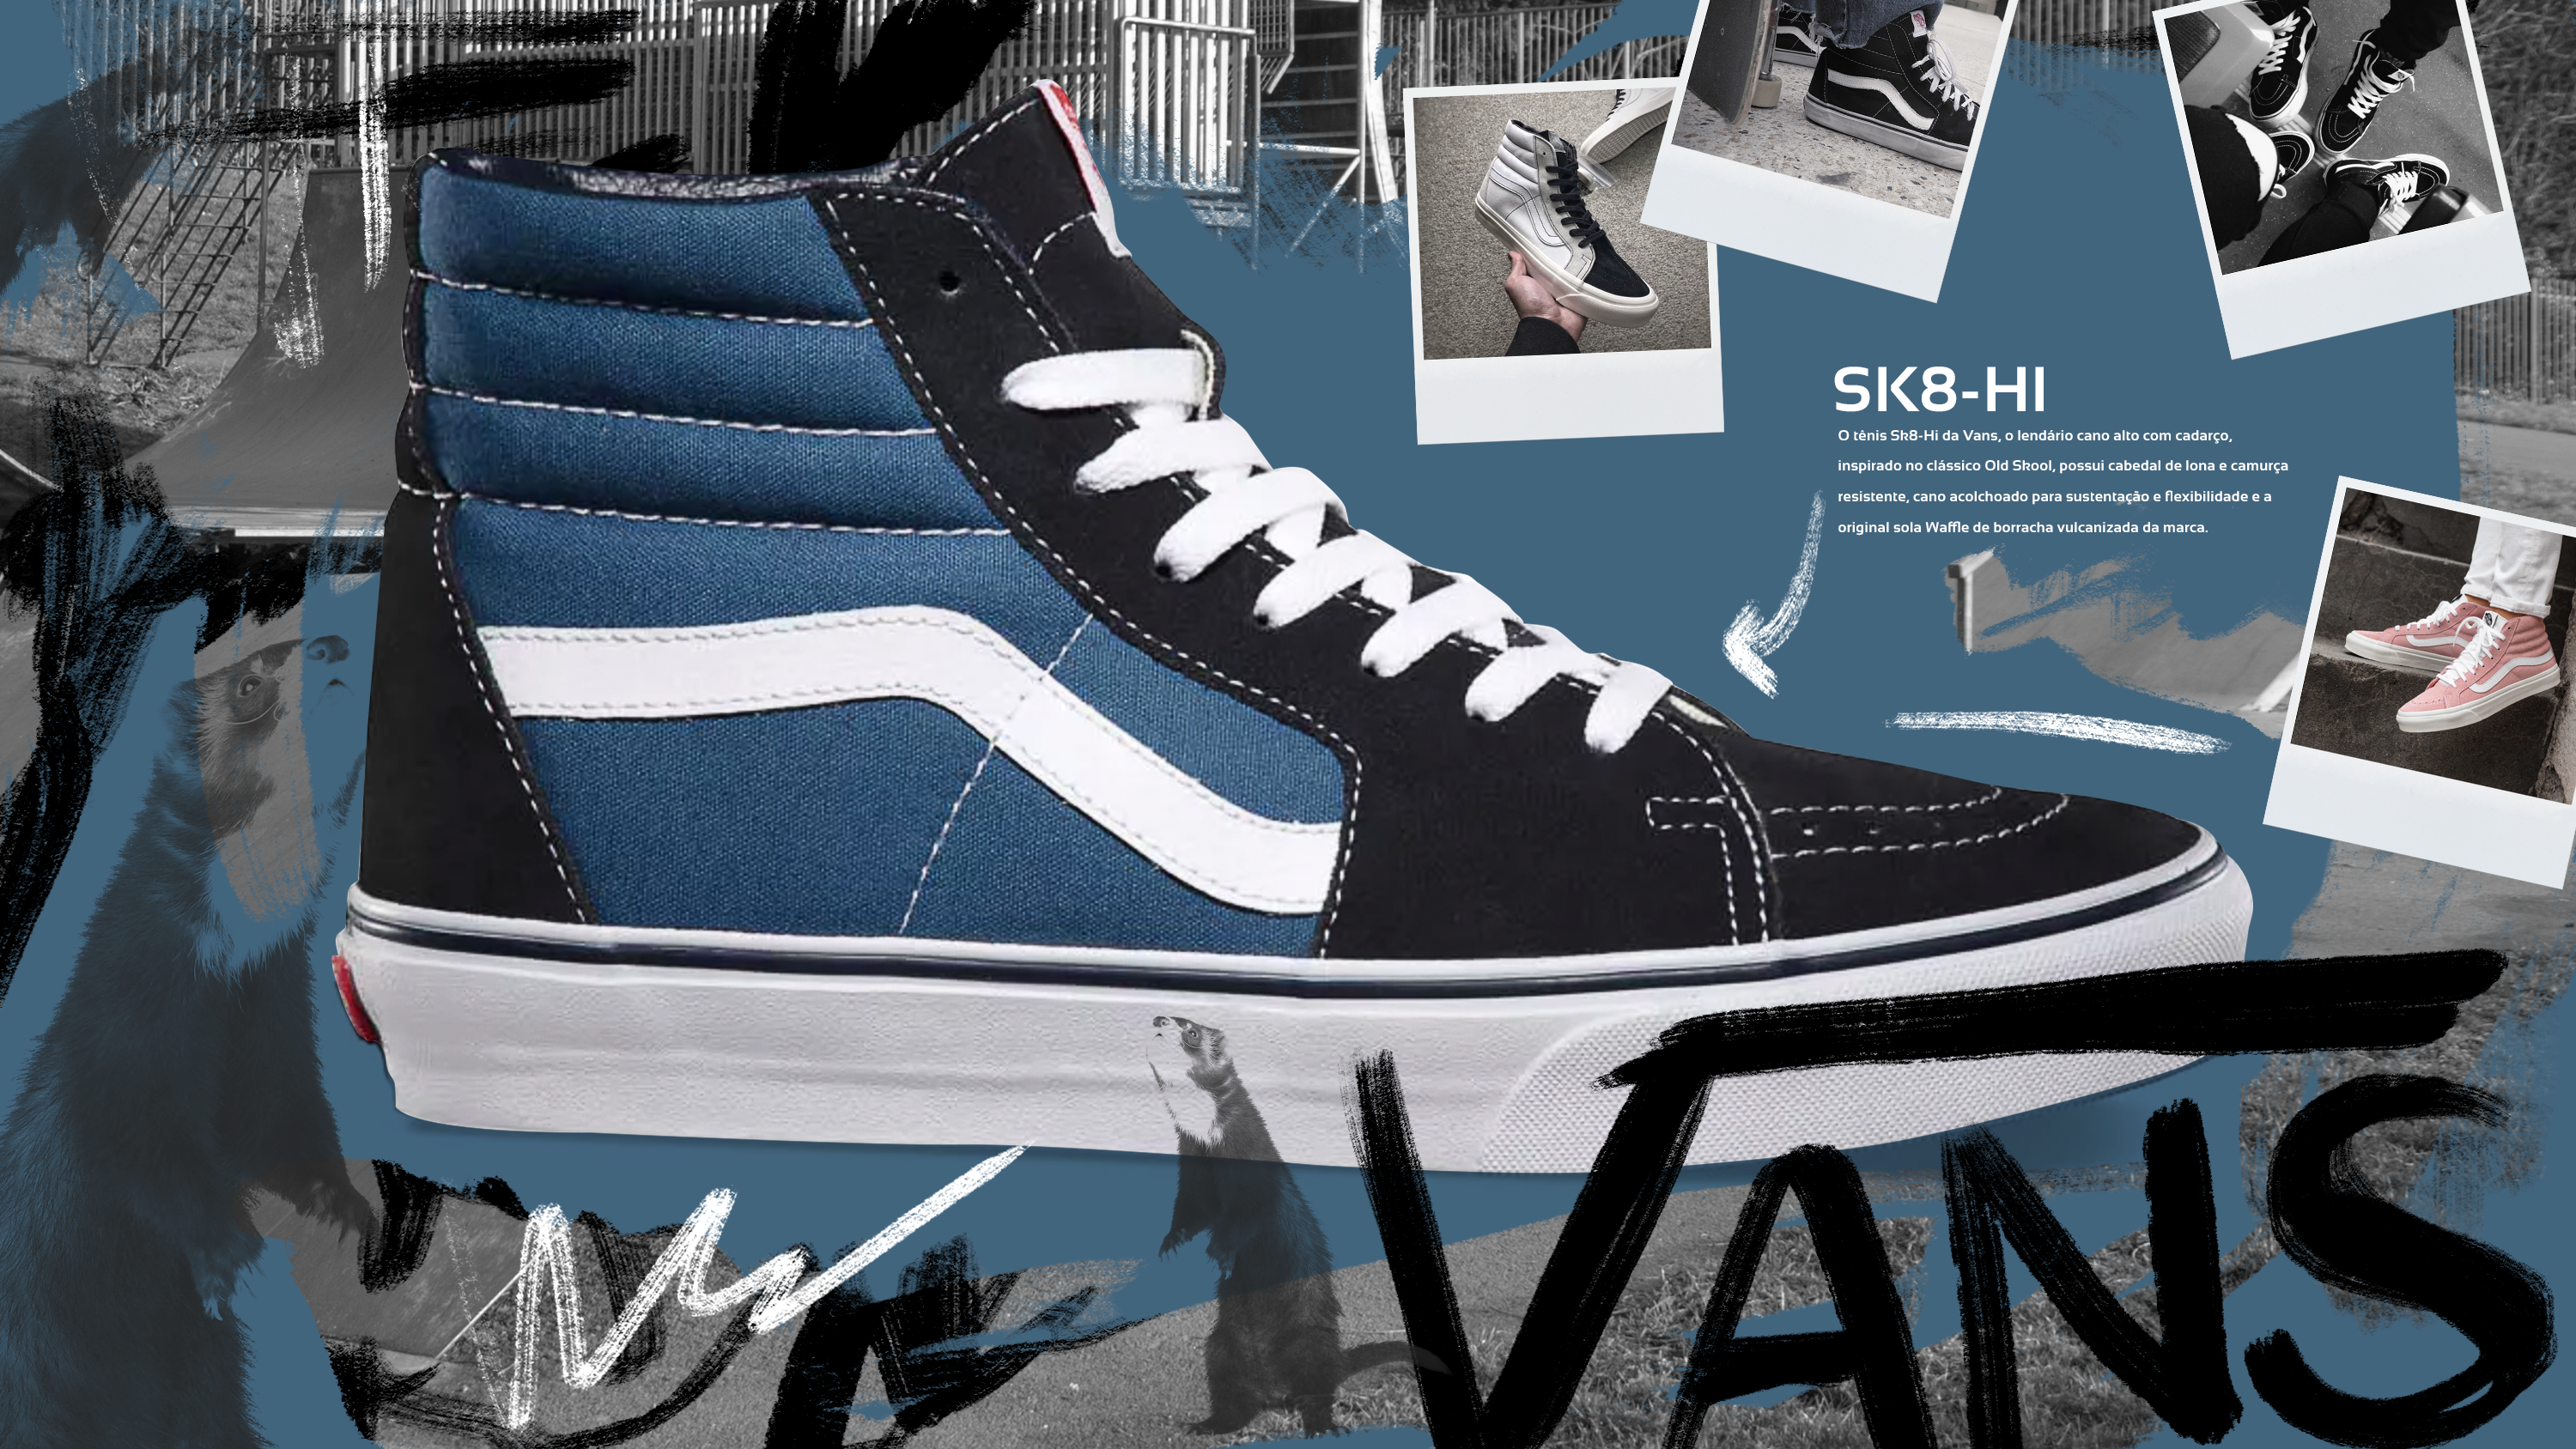 site vans off the wall